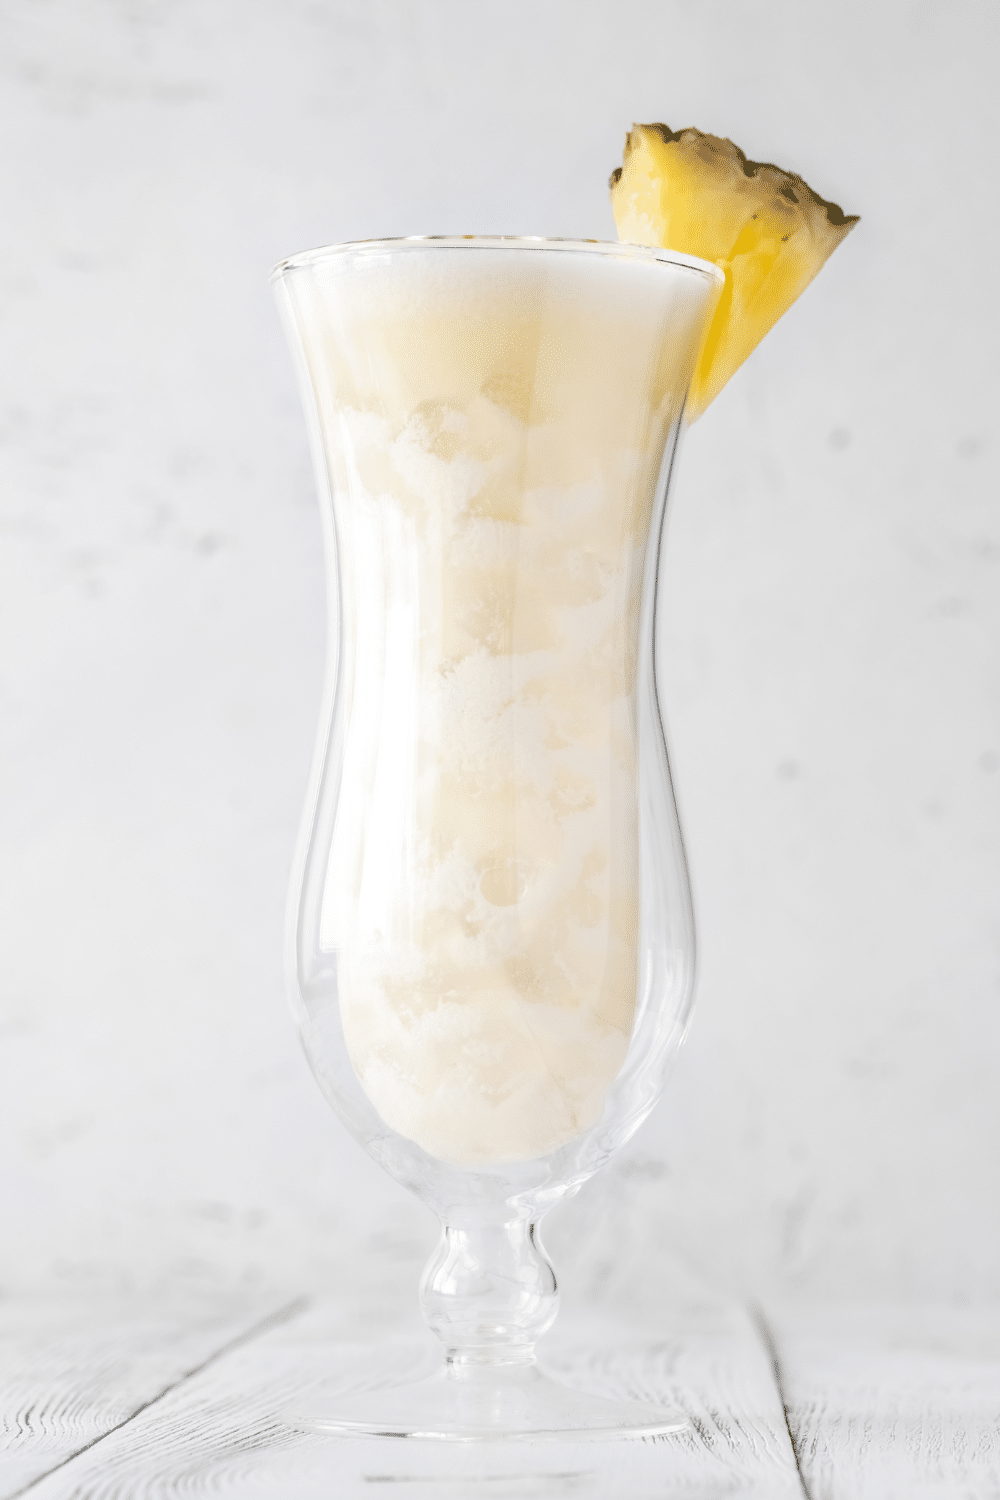 Exotic pina colada with a tropical twist, combining creamy coconut, pineapple juice, and a splash of white rum.